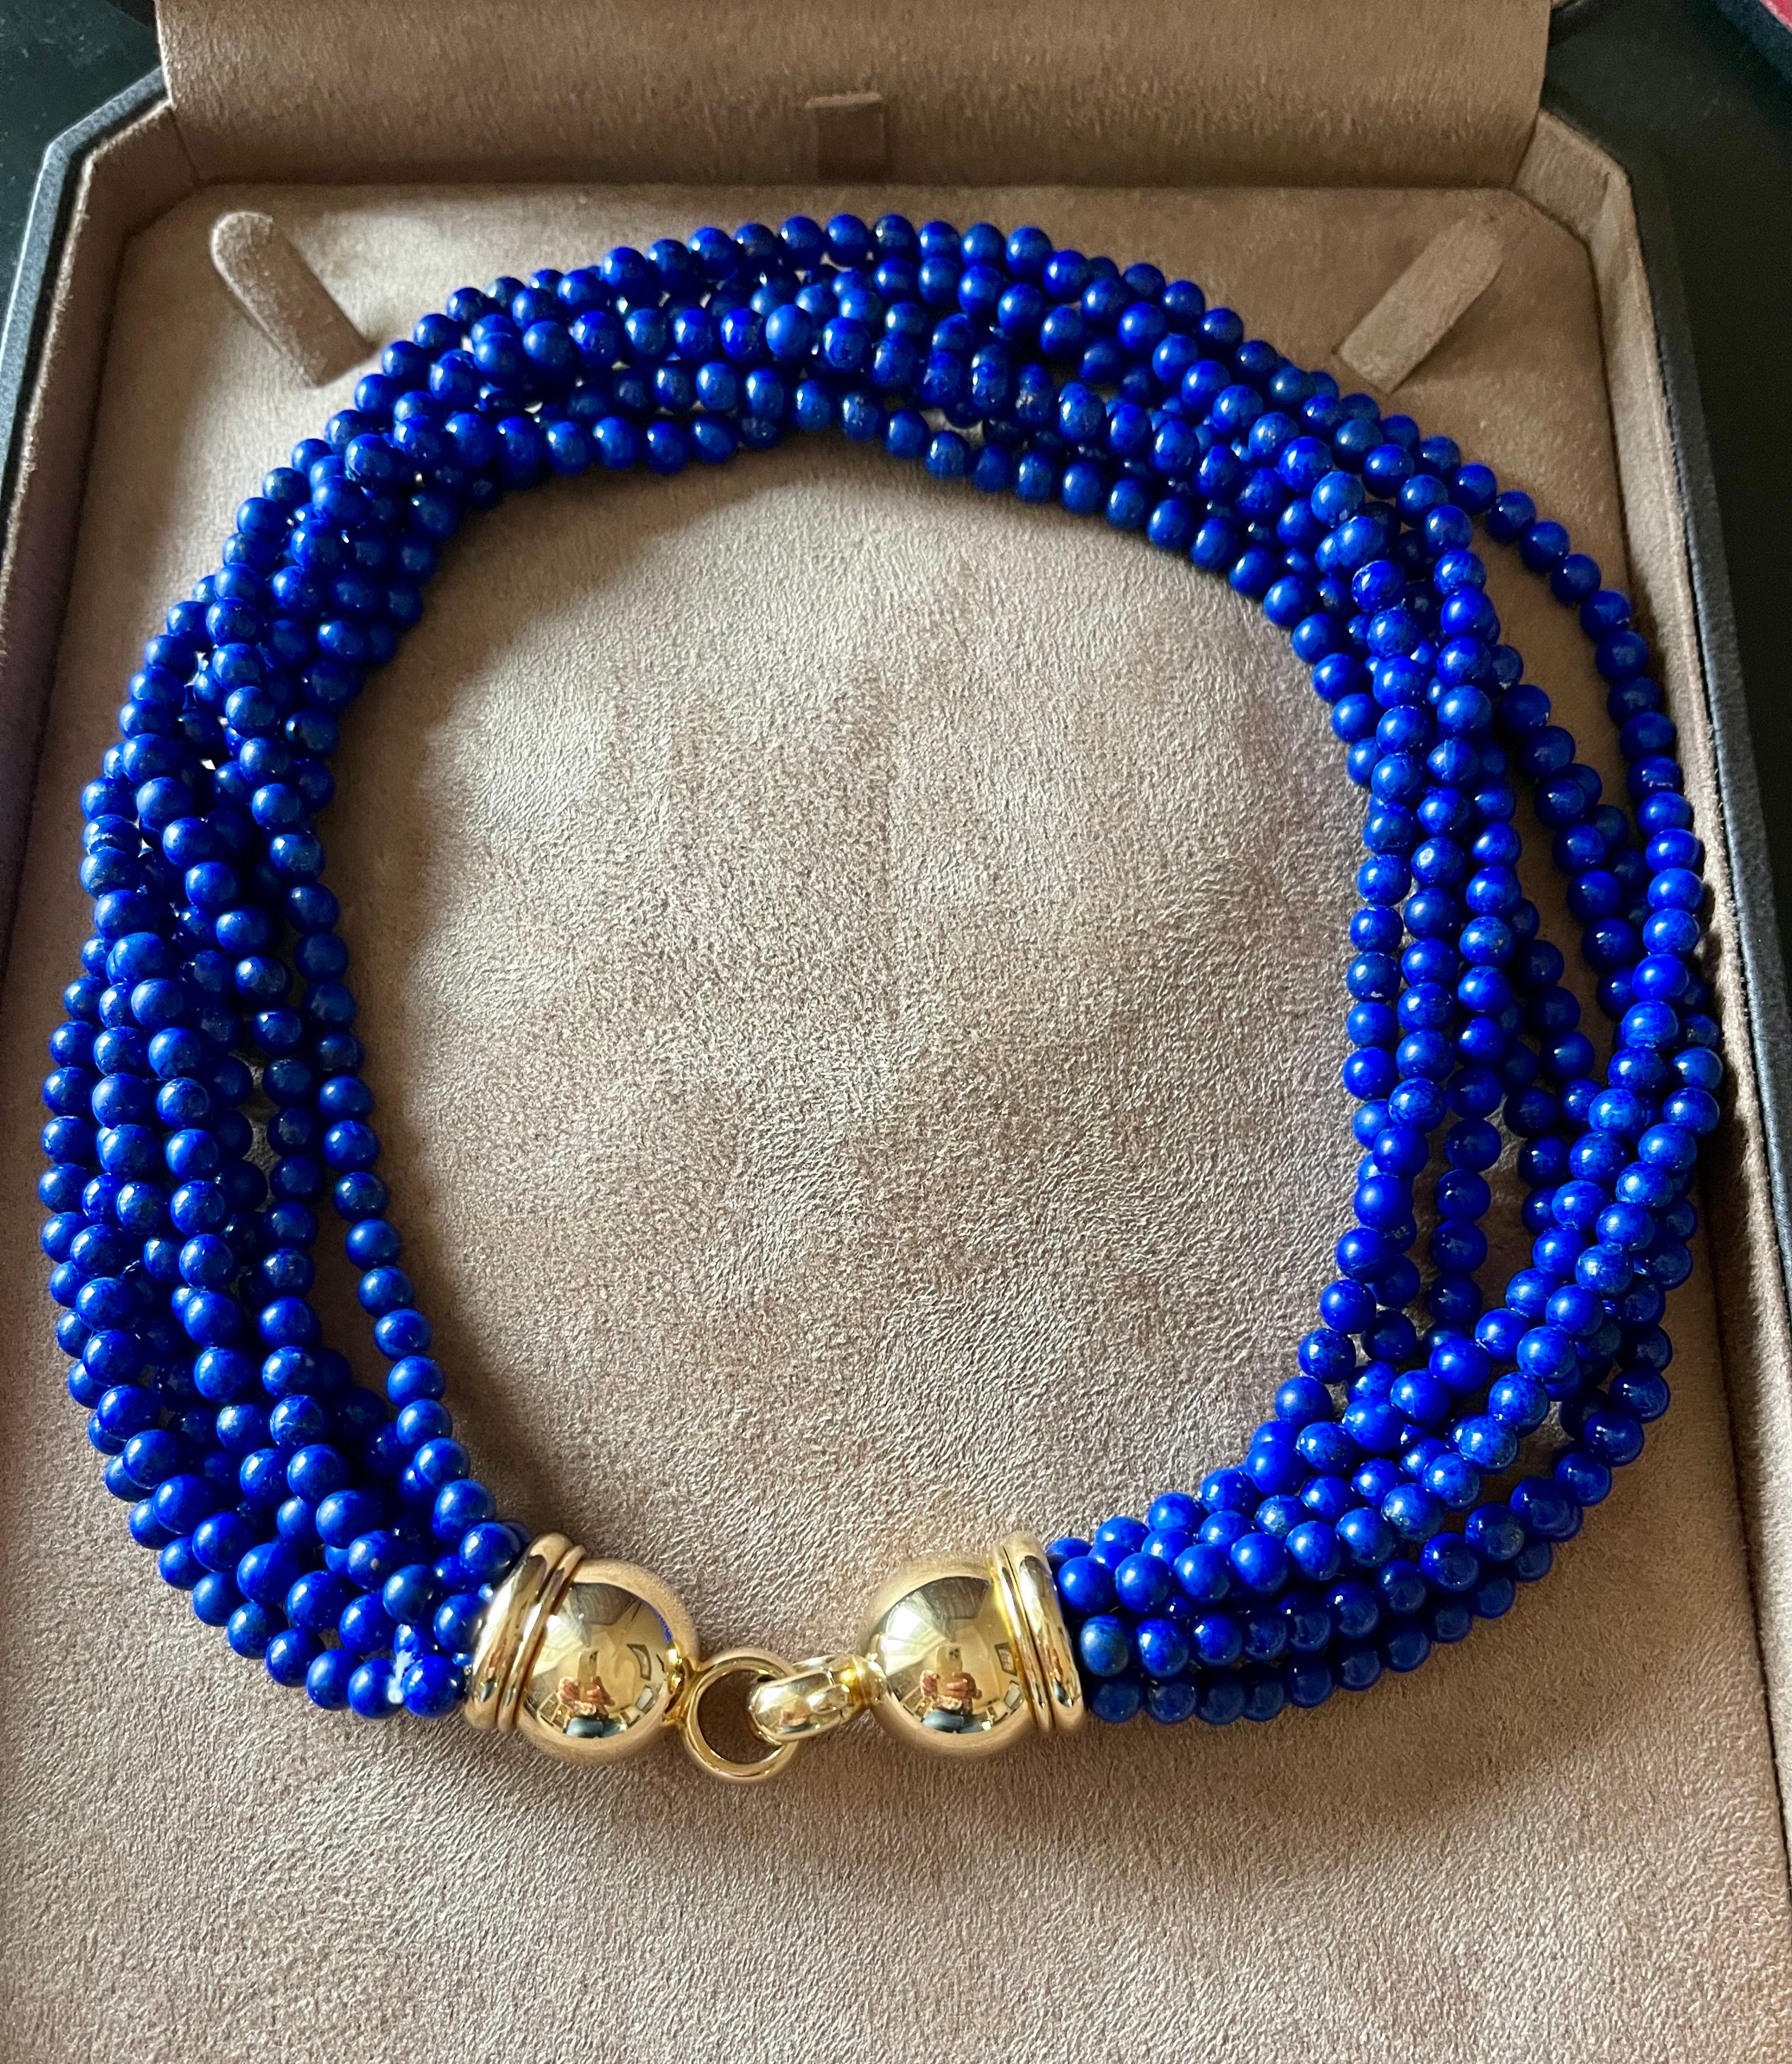 Attractive and timeless 18 K yellow Gold Torsade consisting of 8 strands fine Lapis Lazuli beads. The beads measure ca. 0.5 mm in Diameter. Signed Péclard Zurich. 
The length untwisted is: 44 cm. 
QUESTIONS?  Contact us right away if you have